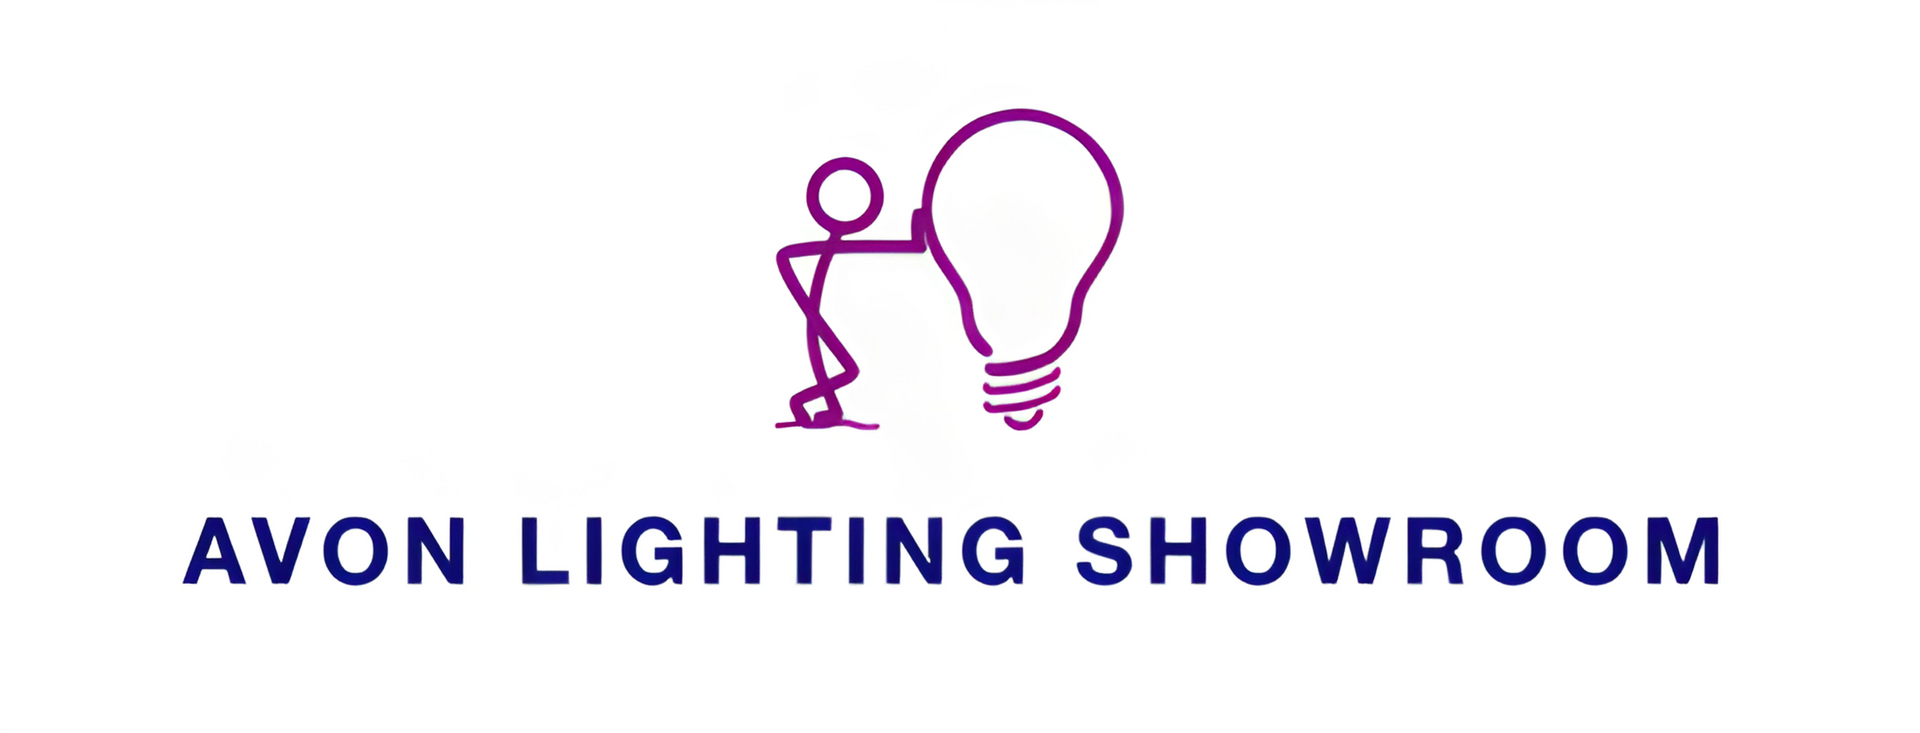 a logo for avon lighting showroom with a lamp in a circle .